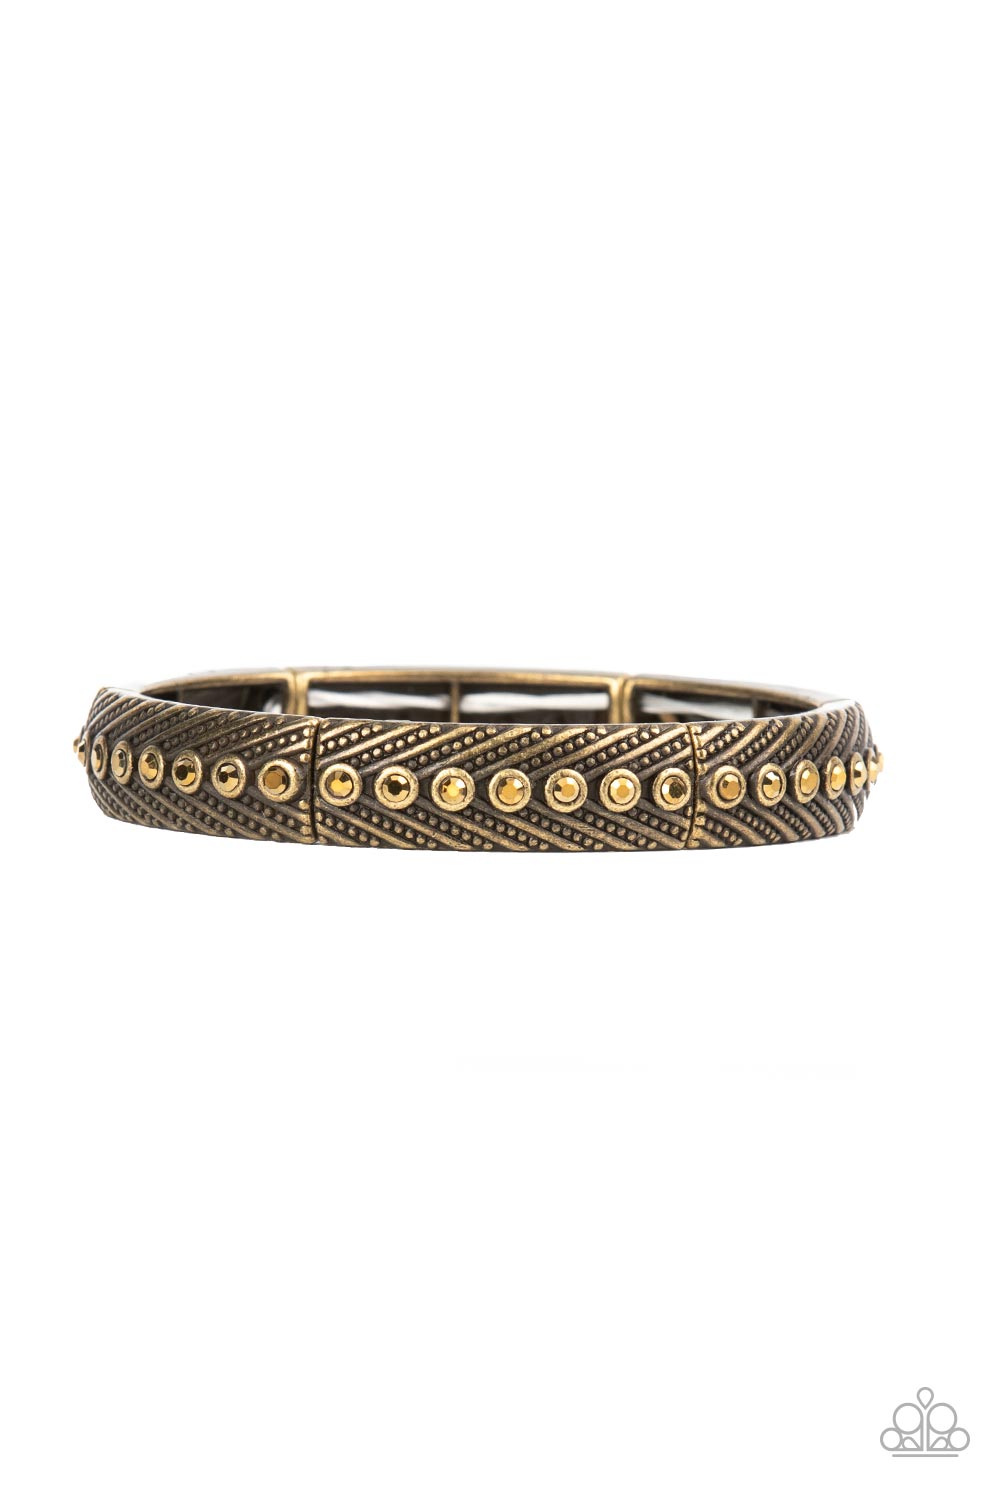 Risk-Taking Twinkle Brass Bracelets Paparazzi Accessores. Subscribe & Save. #P9ED-BRXX-058XX